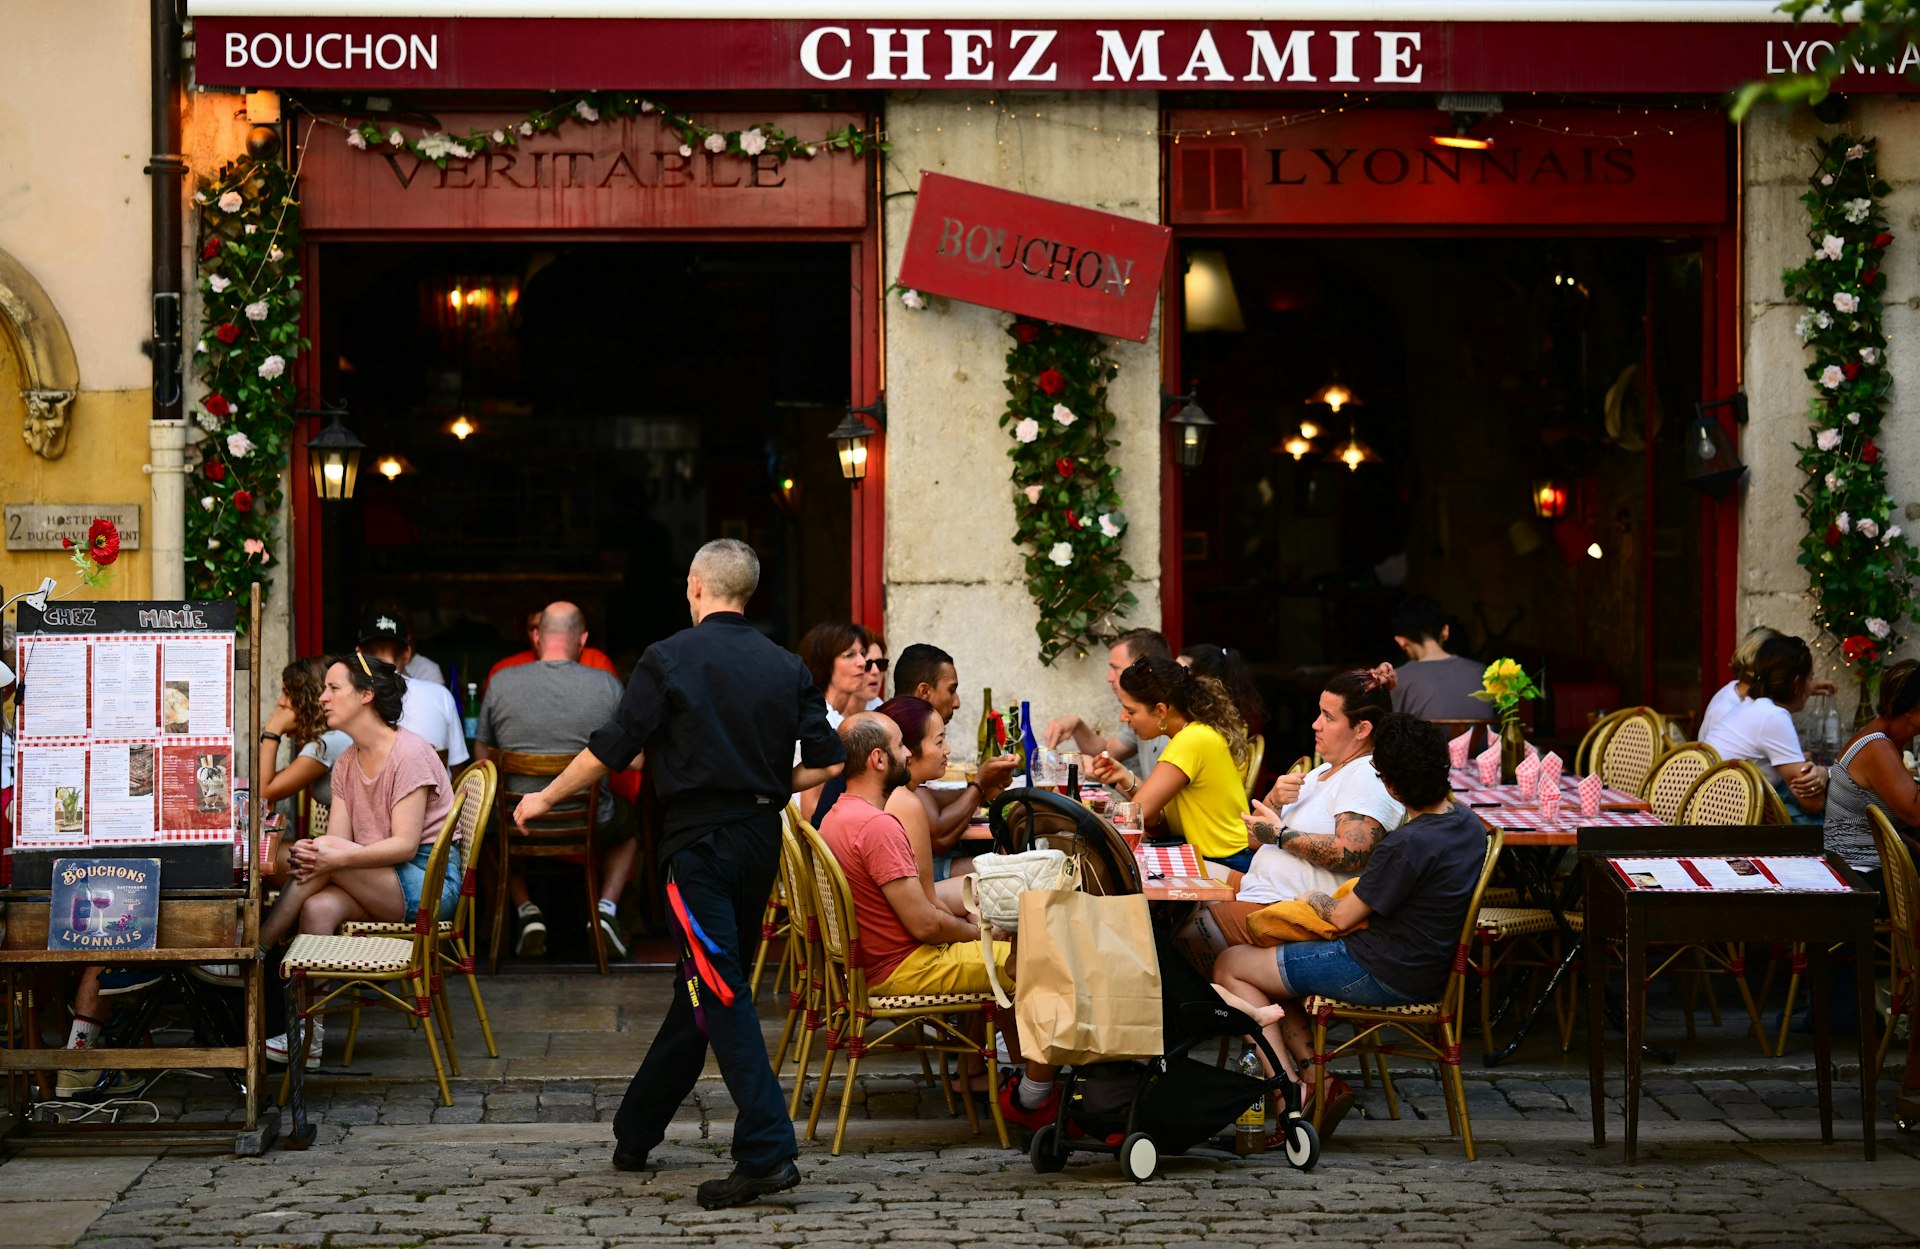 Clients eat at a bouchon, a traditional restaurant, in the old city of Lyon, France